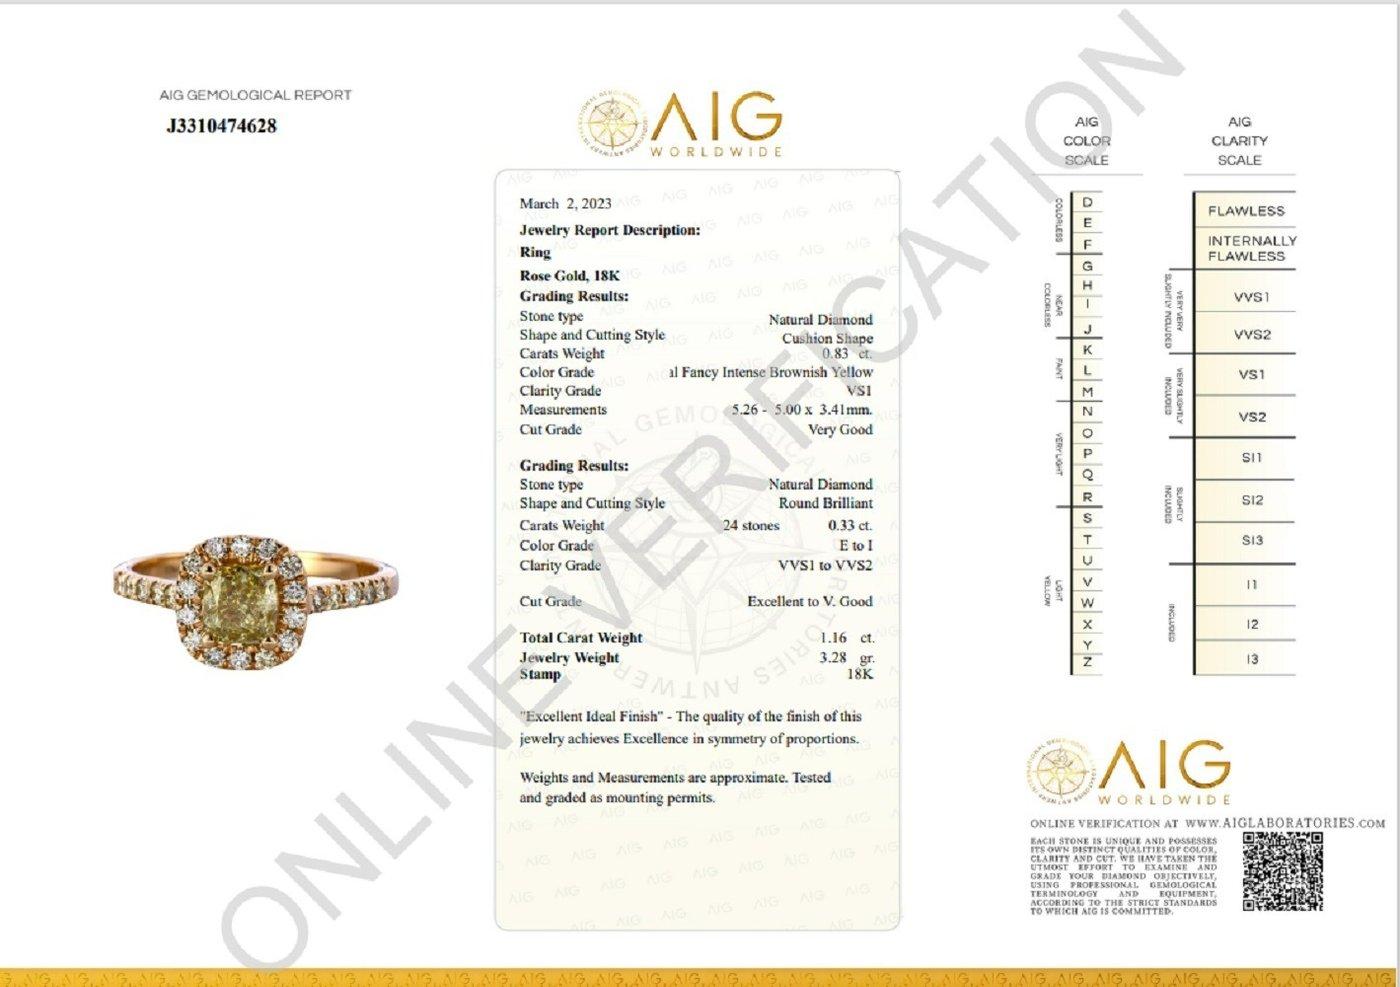 Cushion Cut Gorgeous 18k Rose Gold Pave Halo Ring 1.16ct Natural Diamonds AIG Certificate